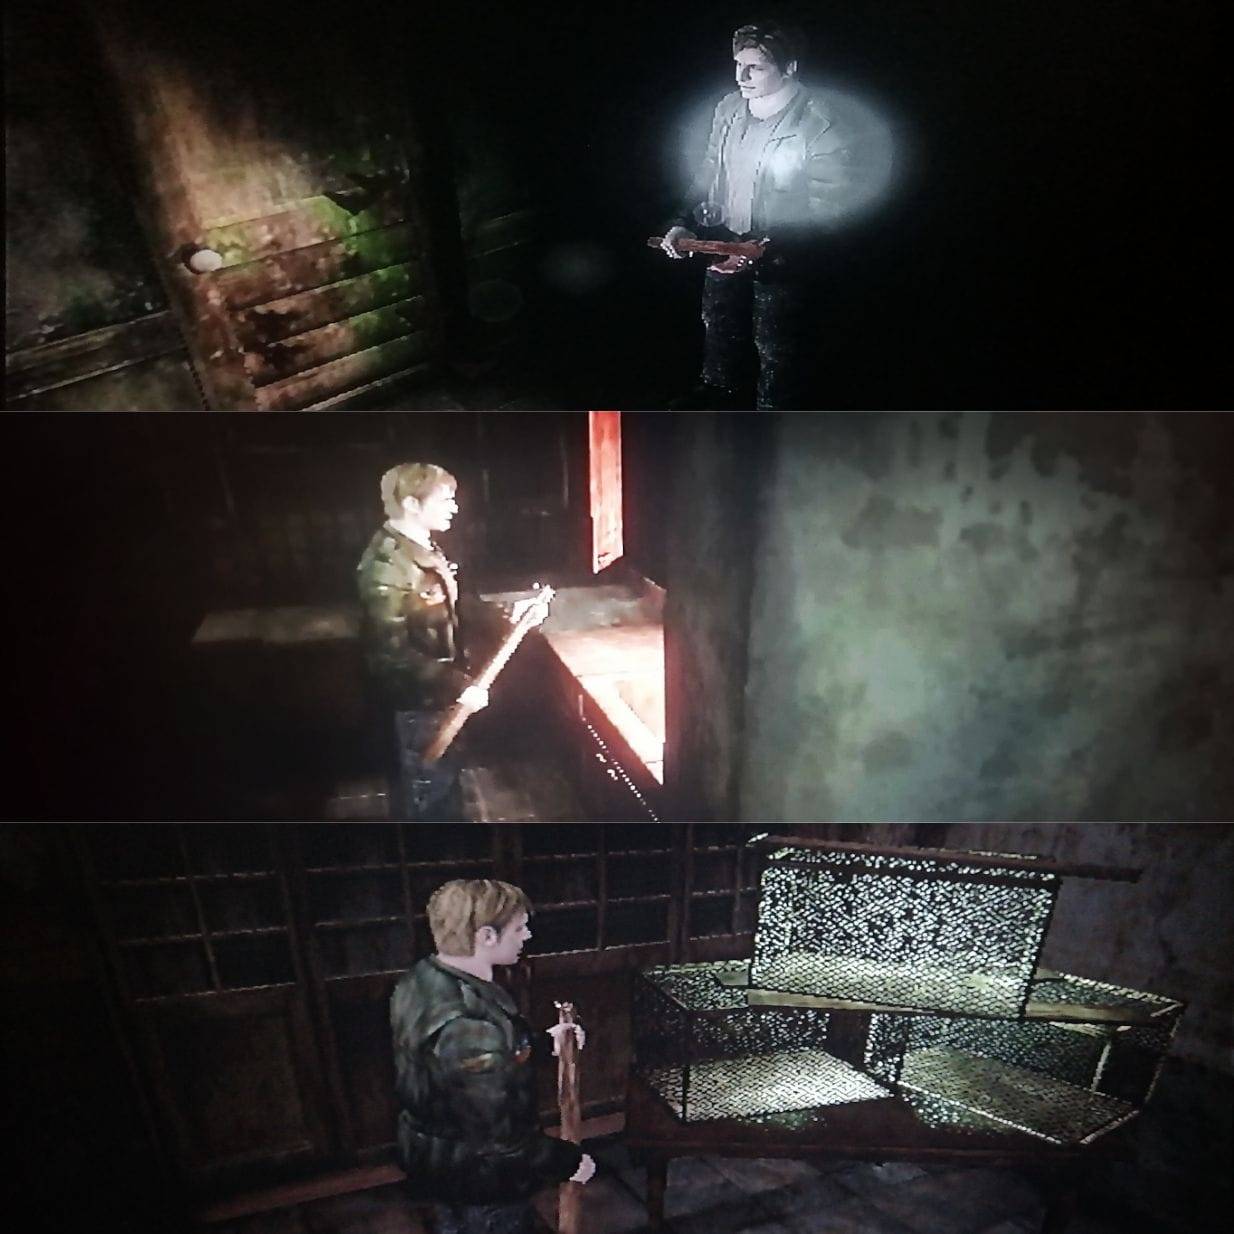 Silent Hill 2 Remake Release in 2023 + Silent Hill Townfall Easter